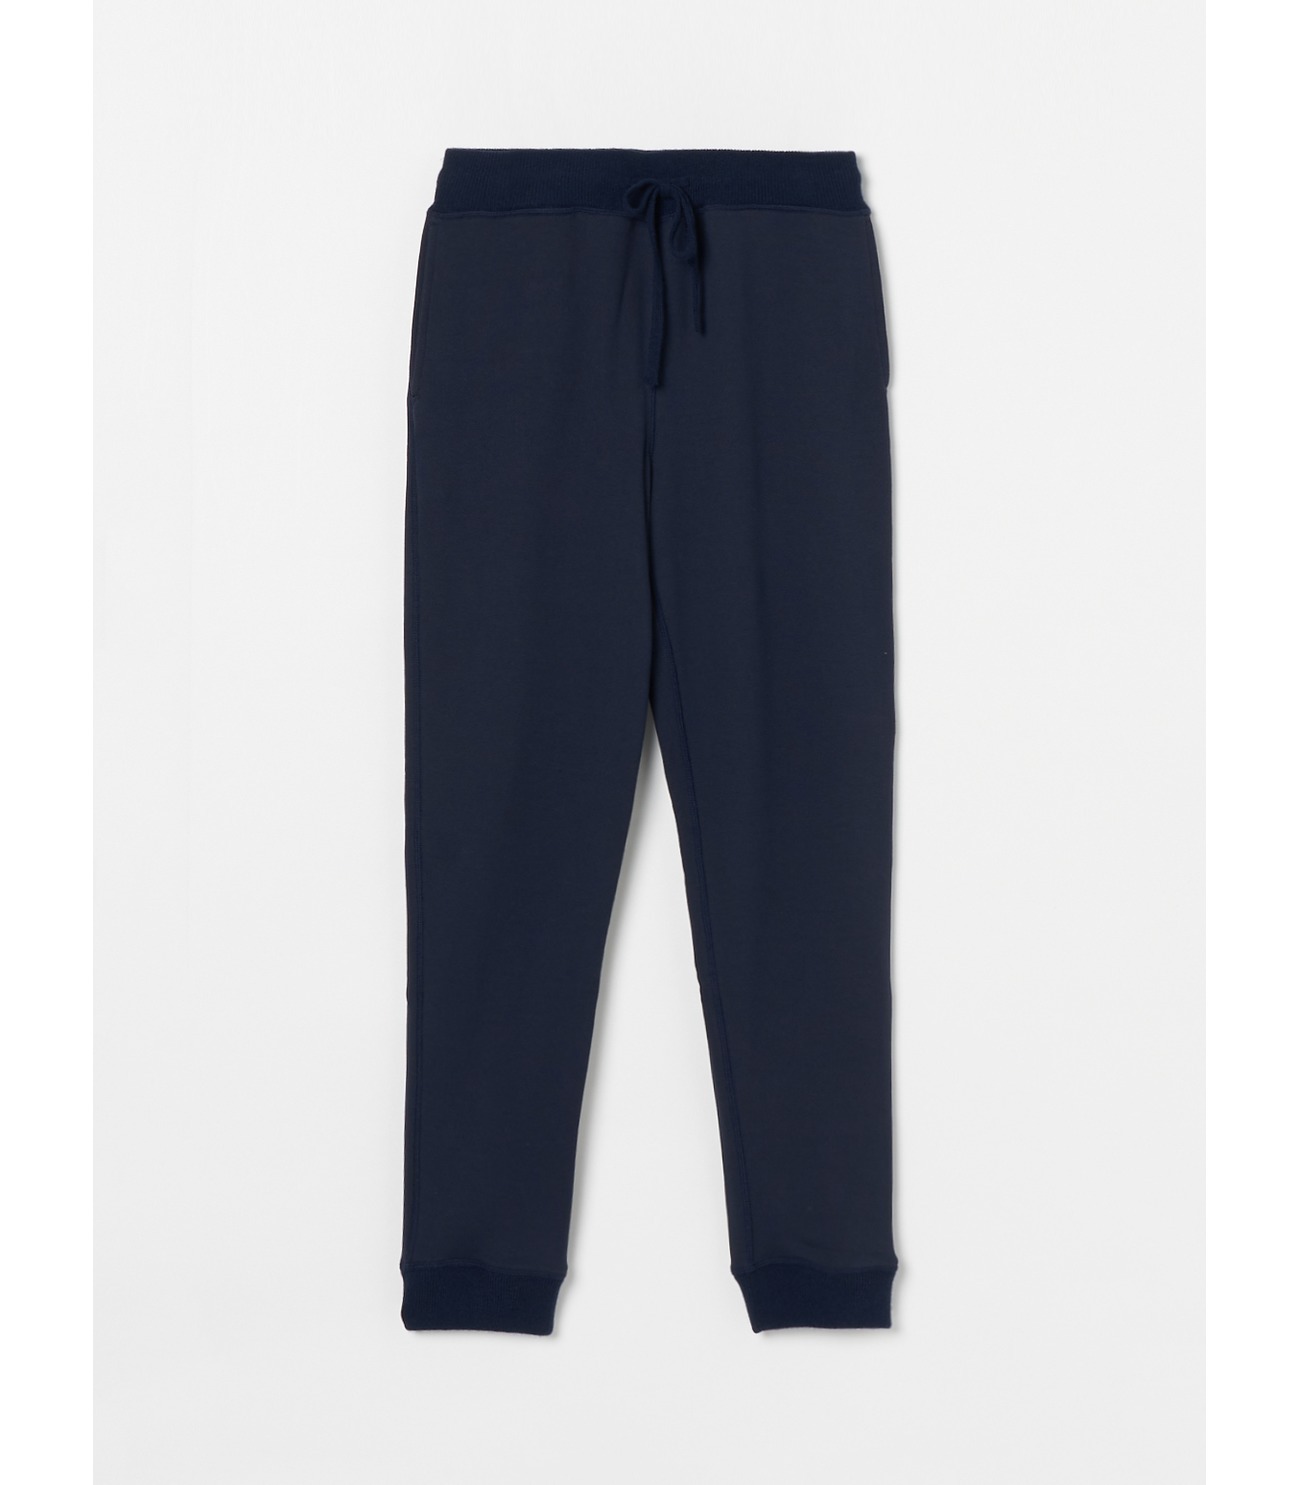 Cashmere×new soft terry pants 詳細画像 navy 2